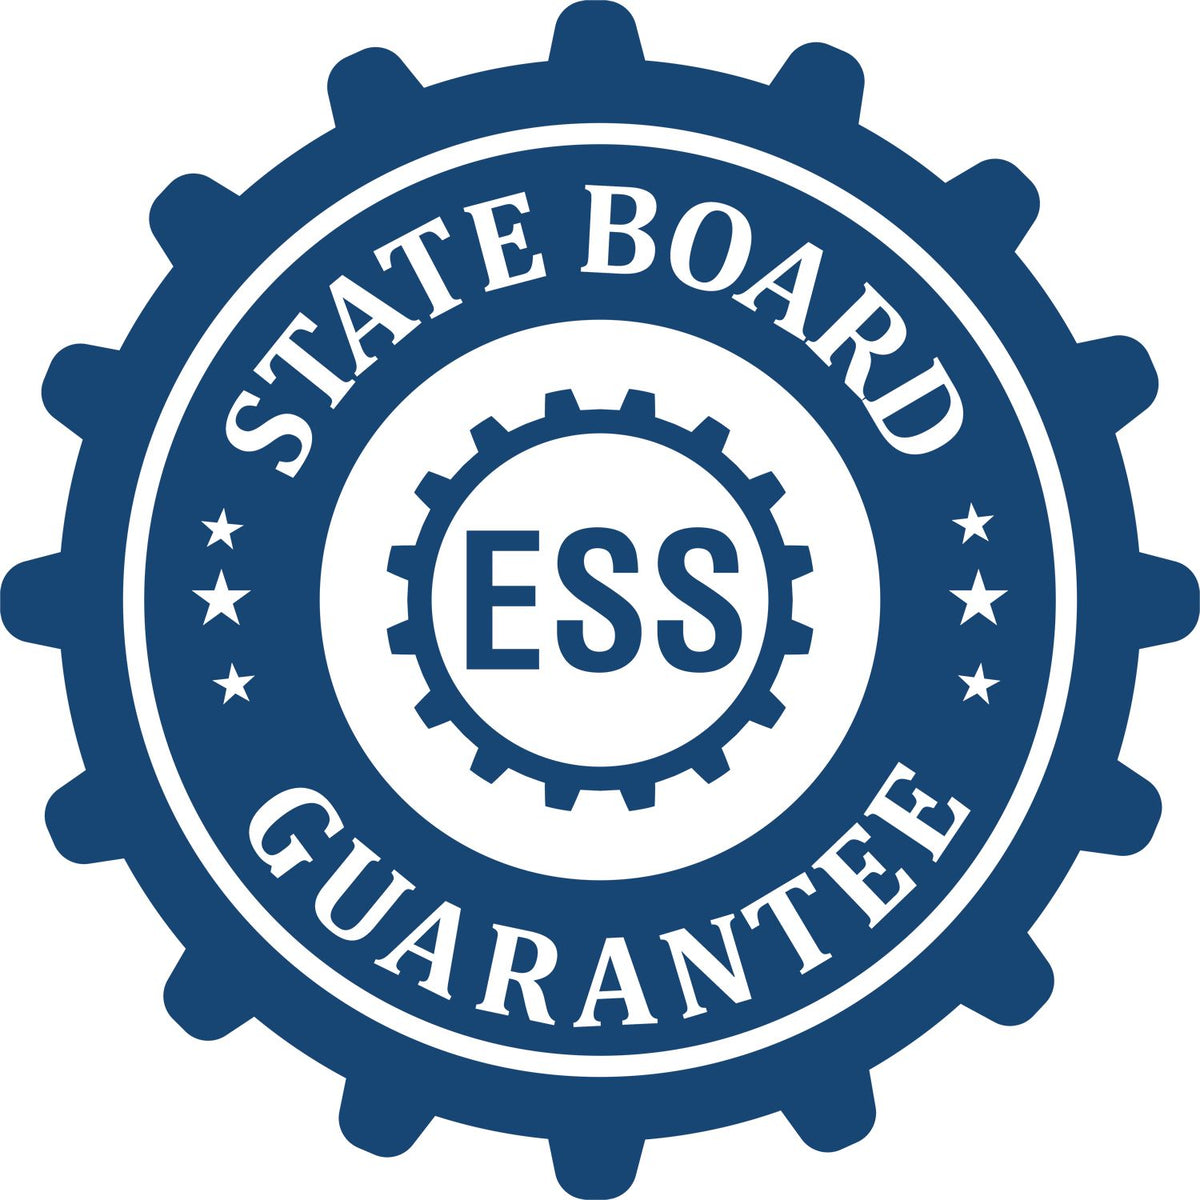 An emblem in a gear shape illustrating a state board guarantee for the State of North Carolina Extended Long Reach Engineer Seal product.